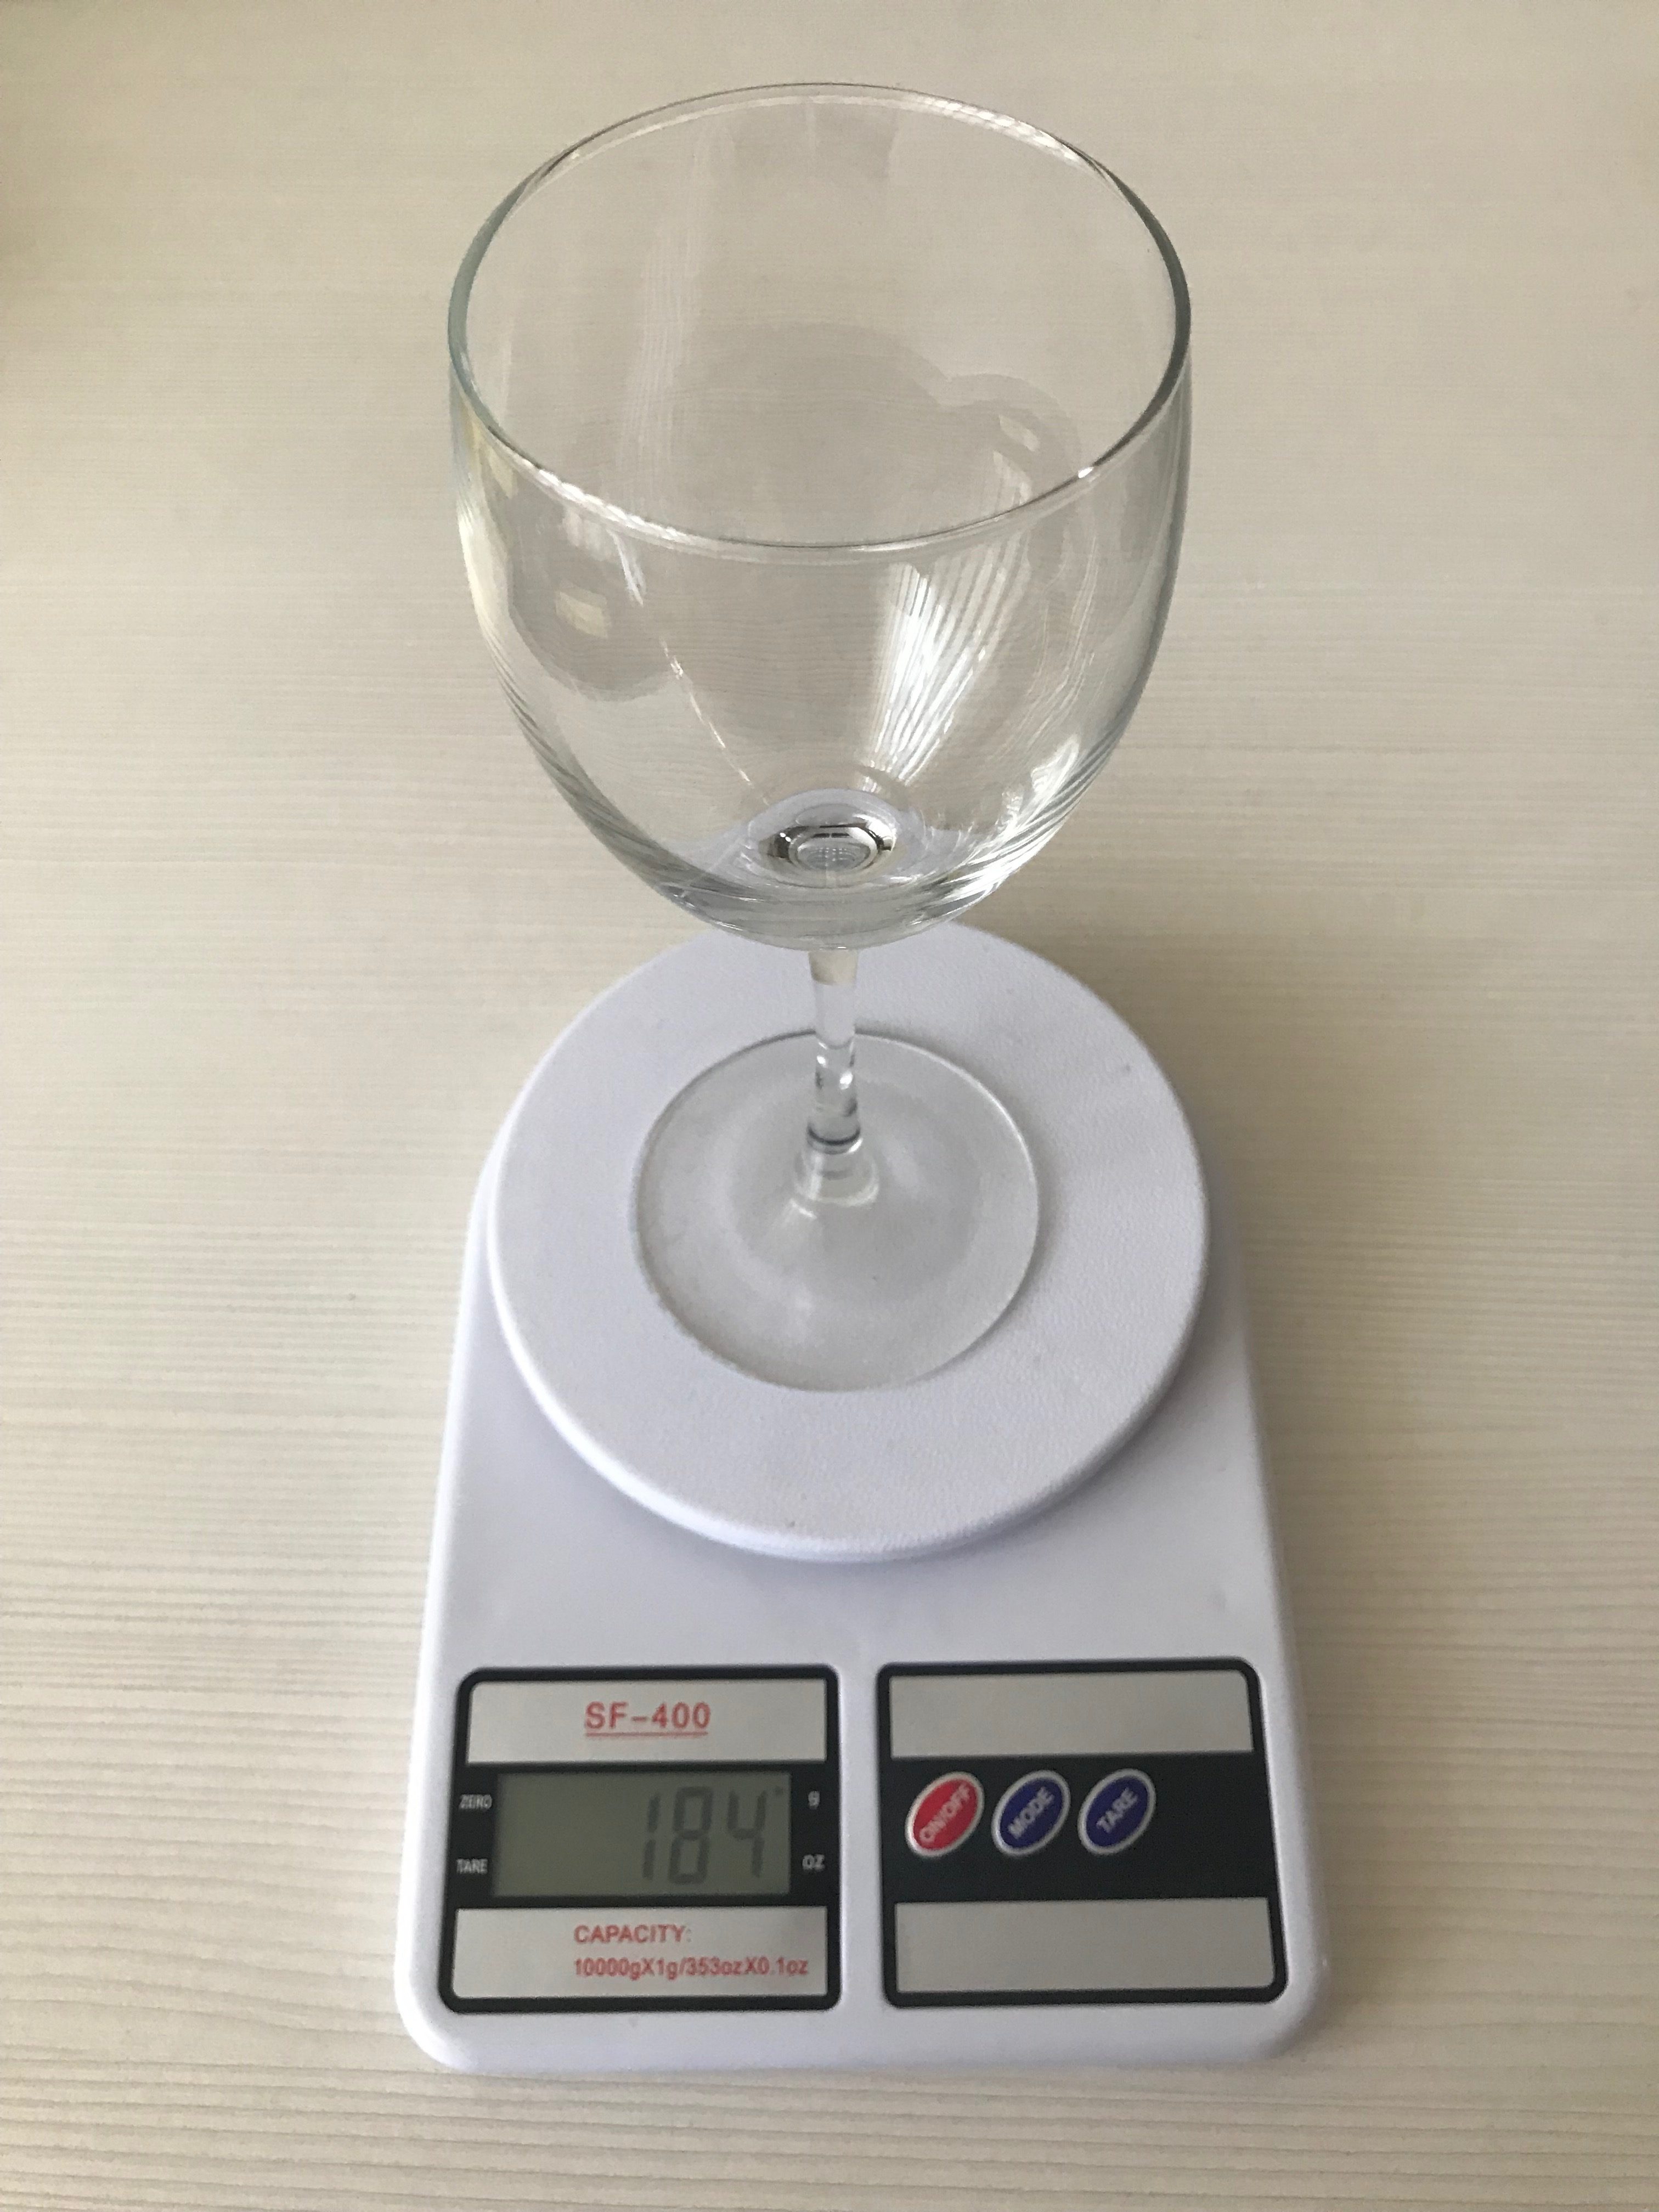 How much does a wine glass weigh?